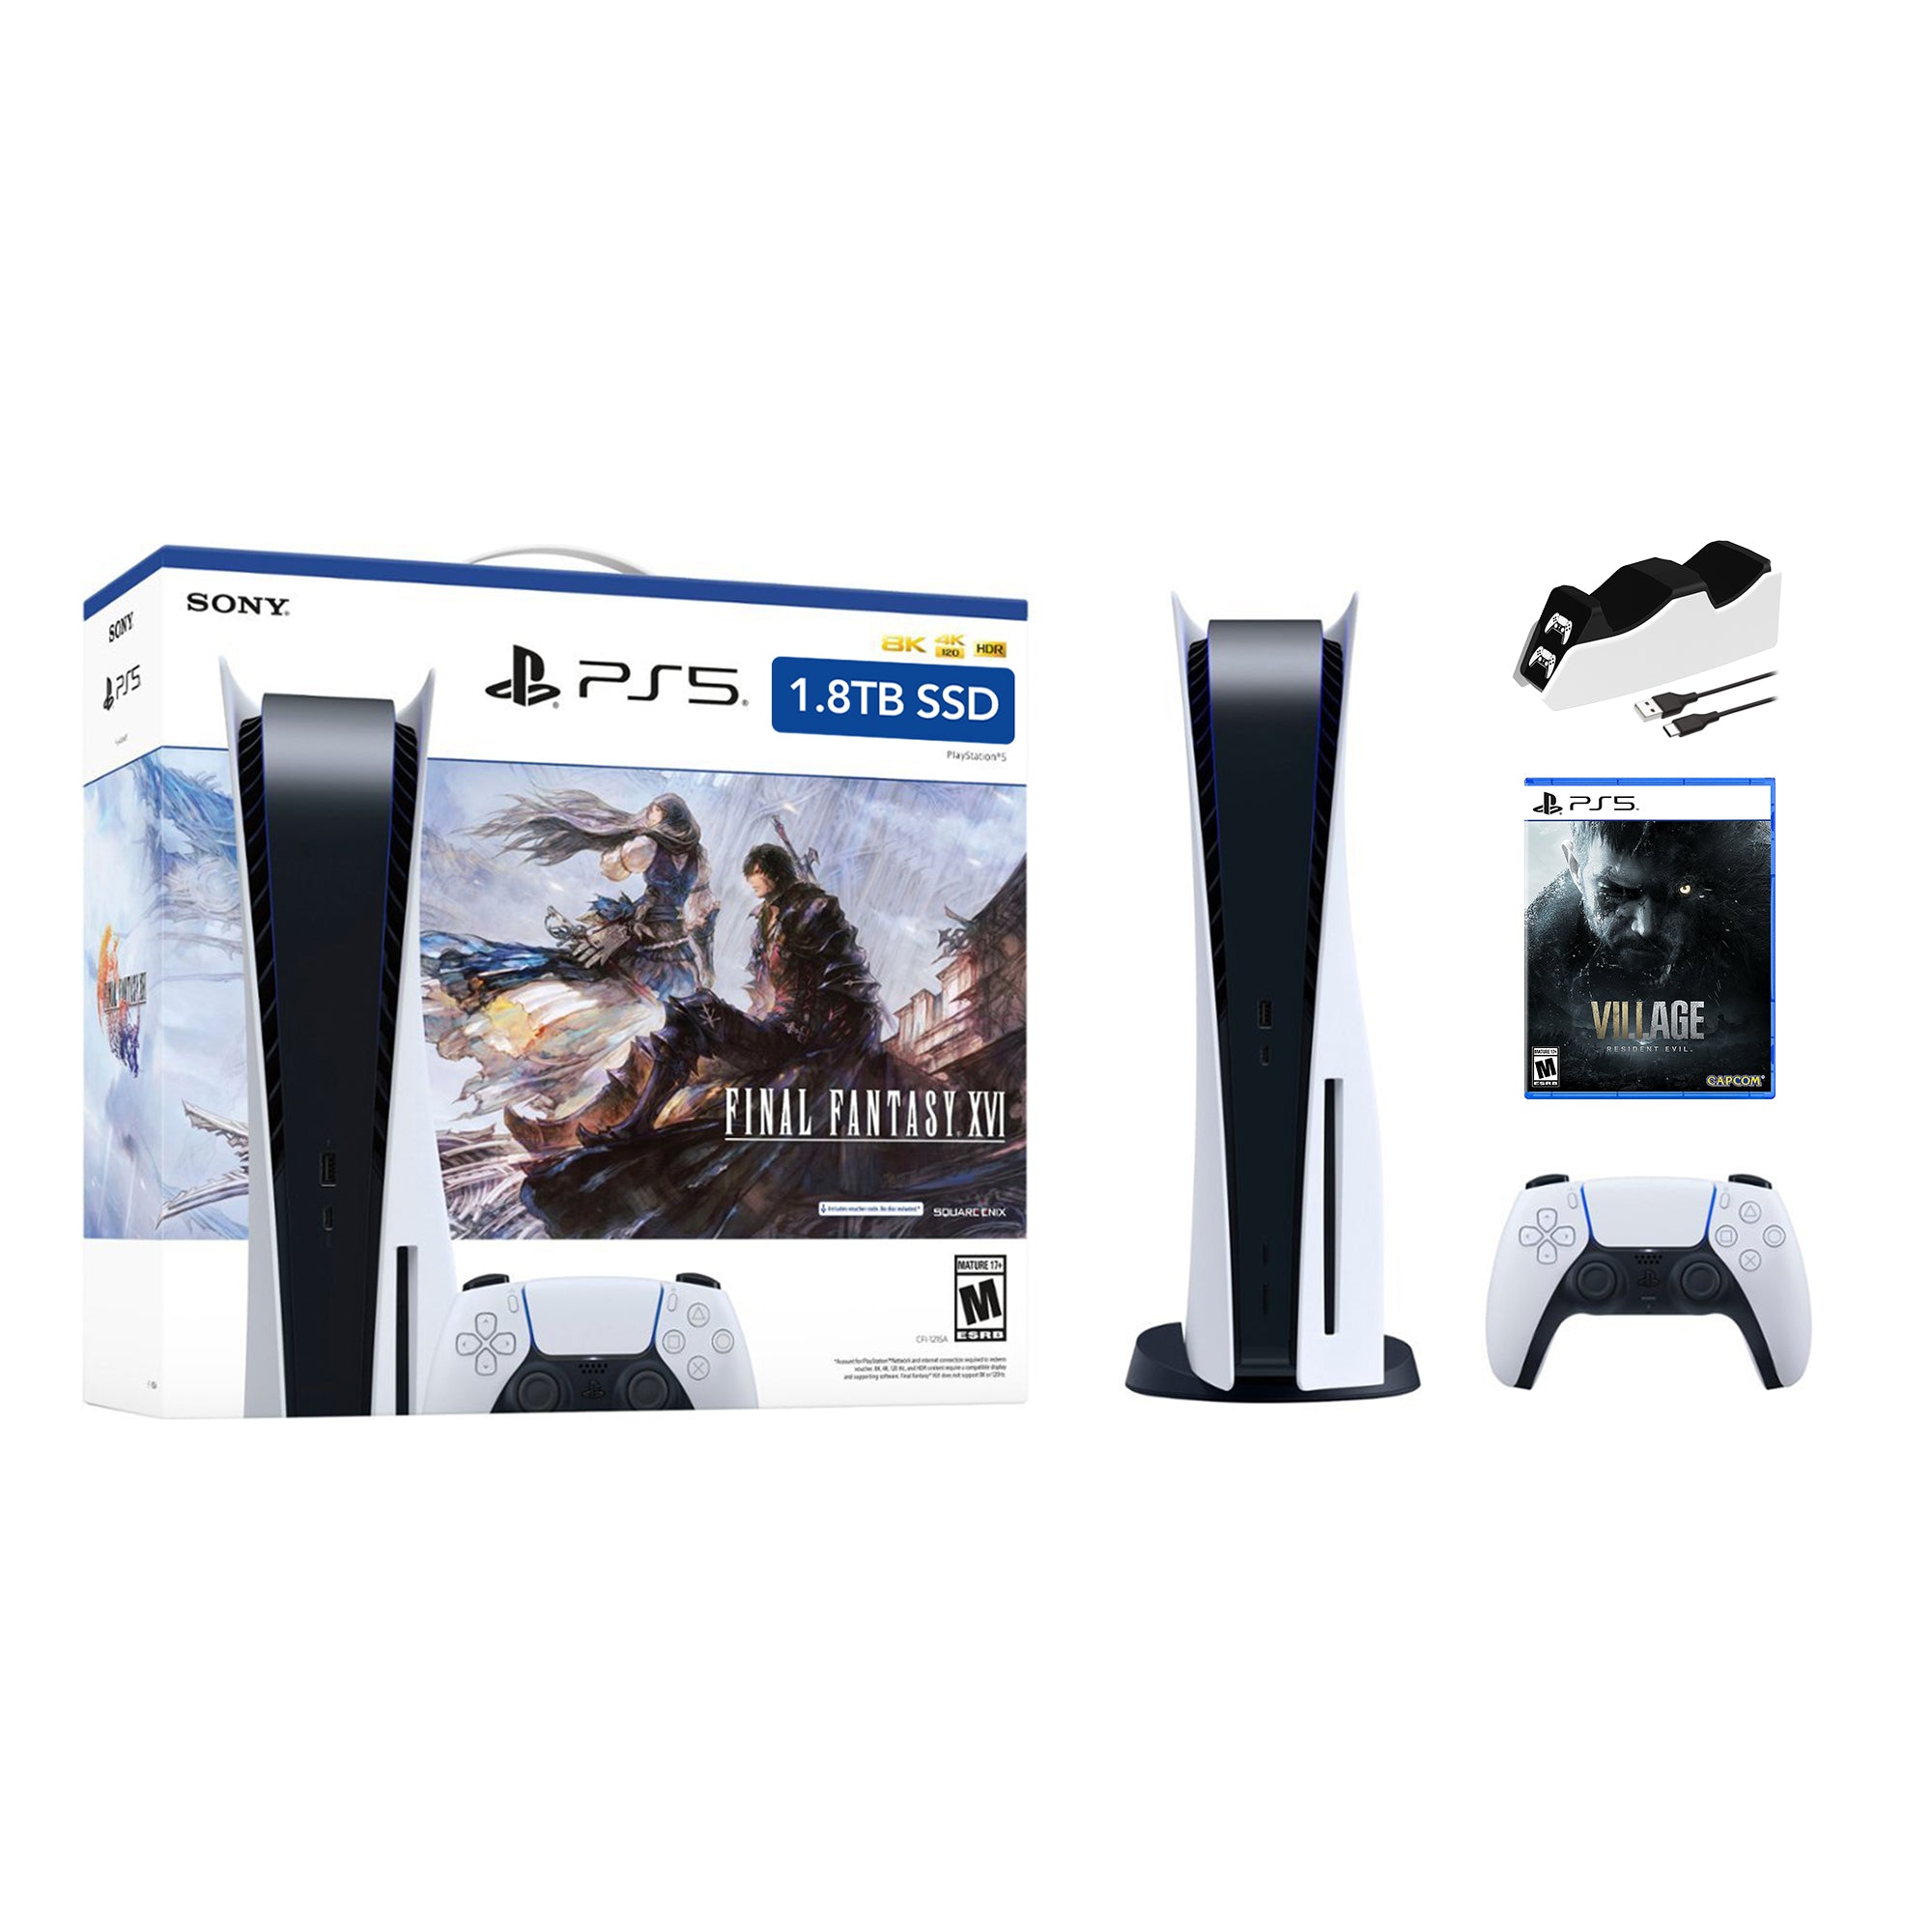 PlayStation 5 Upgraded 1.8TB Disc Edition FINAL FANTASY XVI Bundle with Resident Evil Village and Mytrix Controller Charger - PS5, White